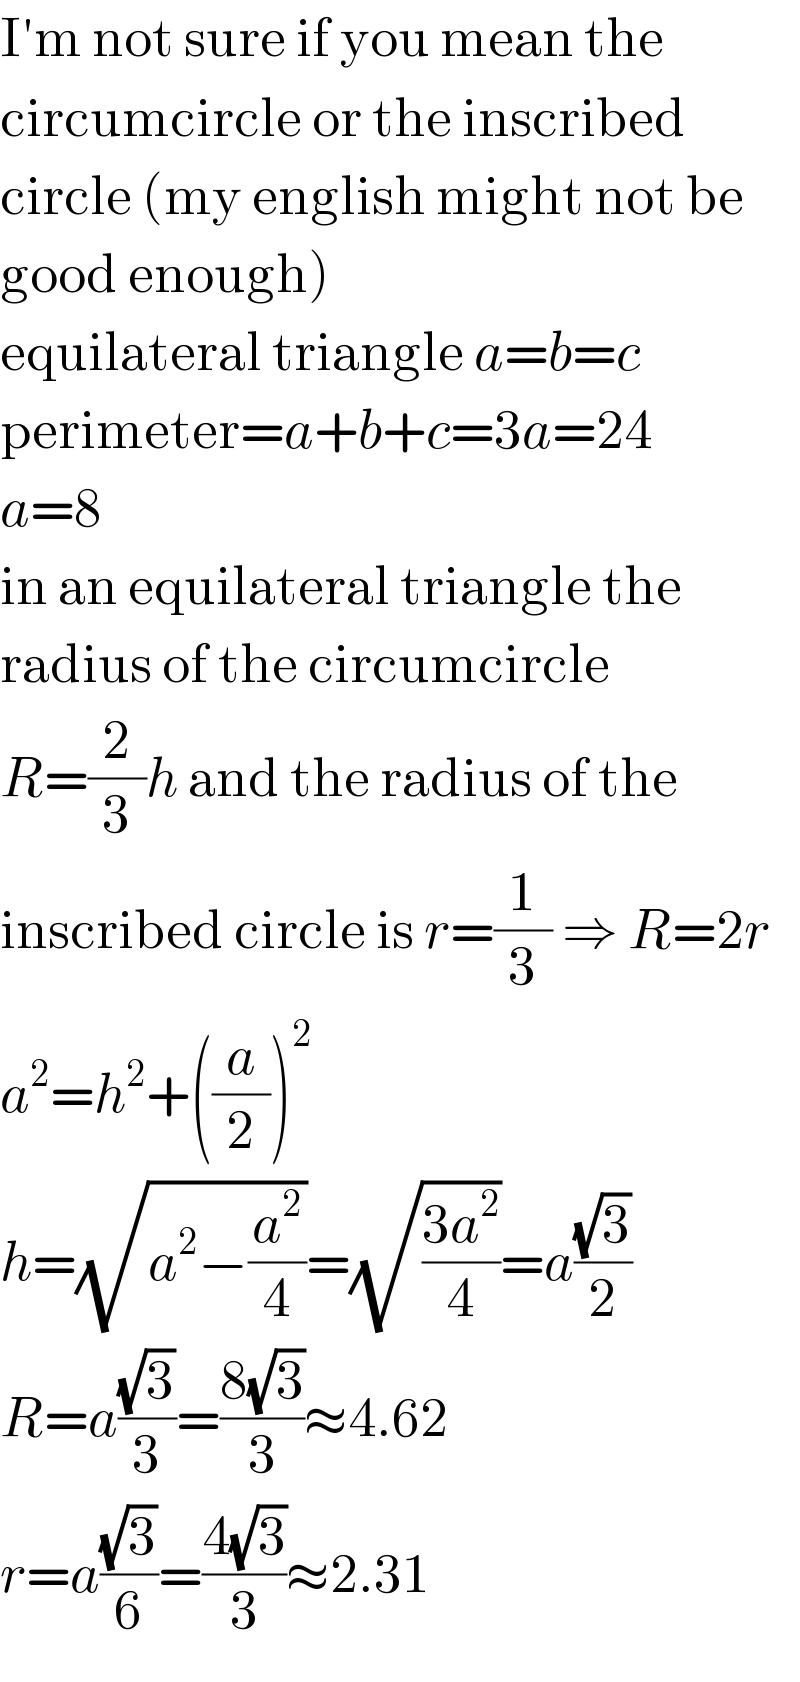 I′m not sure if you mean the  circumcircle or the inscribed  circle (my english might not be  good enough)  equilateral triangle a=b=c  perimeter=a+b+c=3a=24  a=8  in an equilateral triangle the  radius of the circumcircle  R=(2/3)h and the radius of the  inscribed circle is r=(1/3) ⇒ R=2r  a^2 =h^2 +((a/2))^2   h=(√(a^2 −(a^2 /4)))=(√((3a^2 )/4))=a((√3)/2)  R=a((√3)/3)=((8(√3))/3)≈4.62  r=a((√3)/6)=((4(√3))/3)≈2.31  